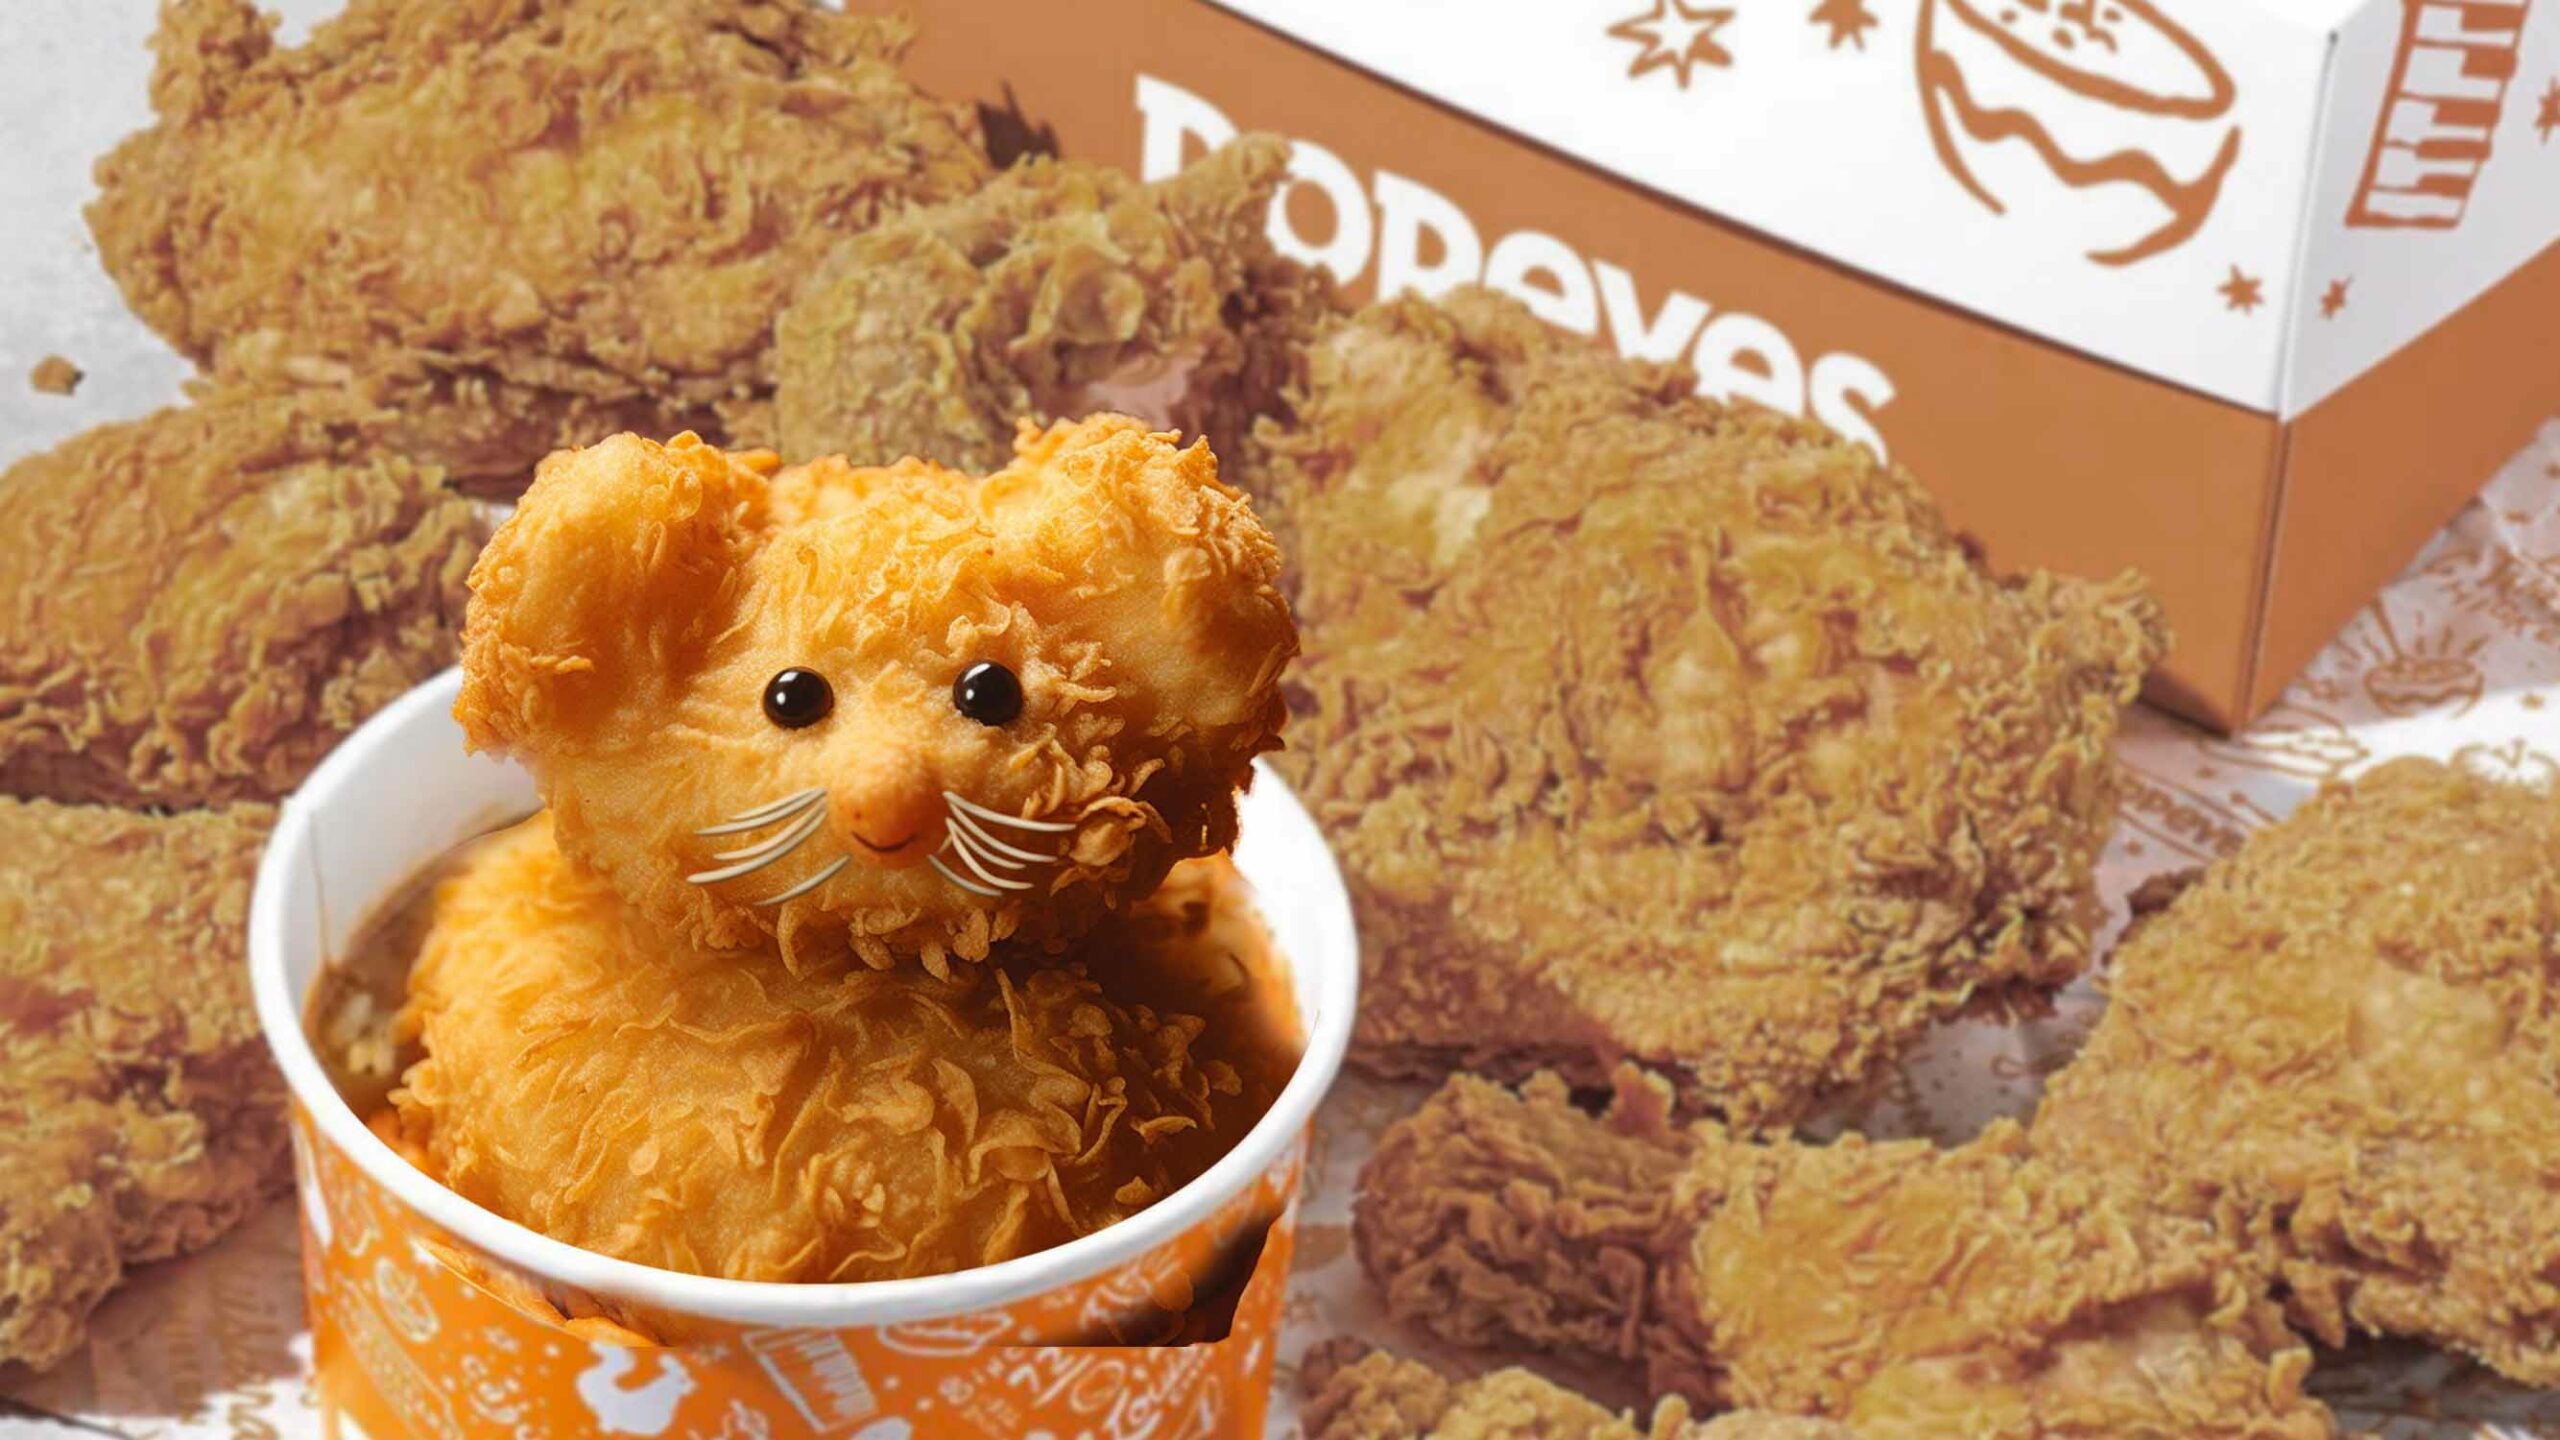 A Cute Fried Mouse In A Popeye'S Fried Chicken Meal